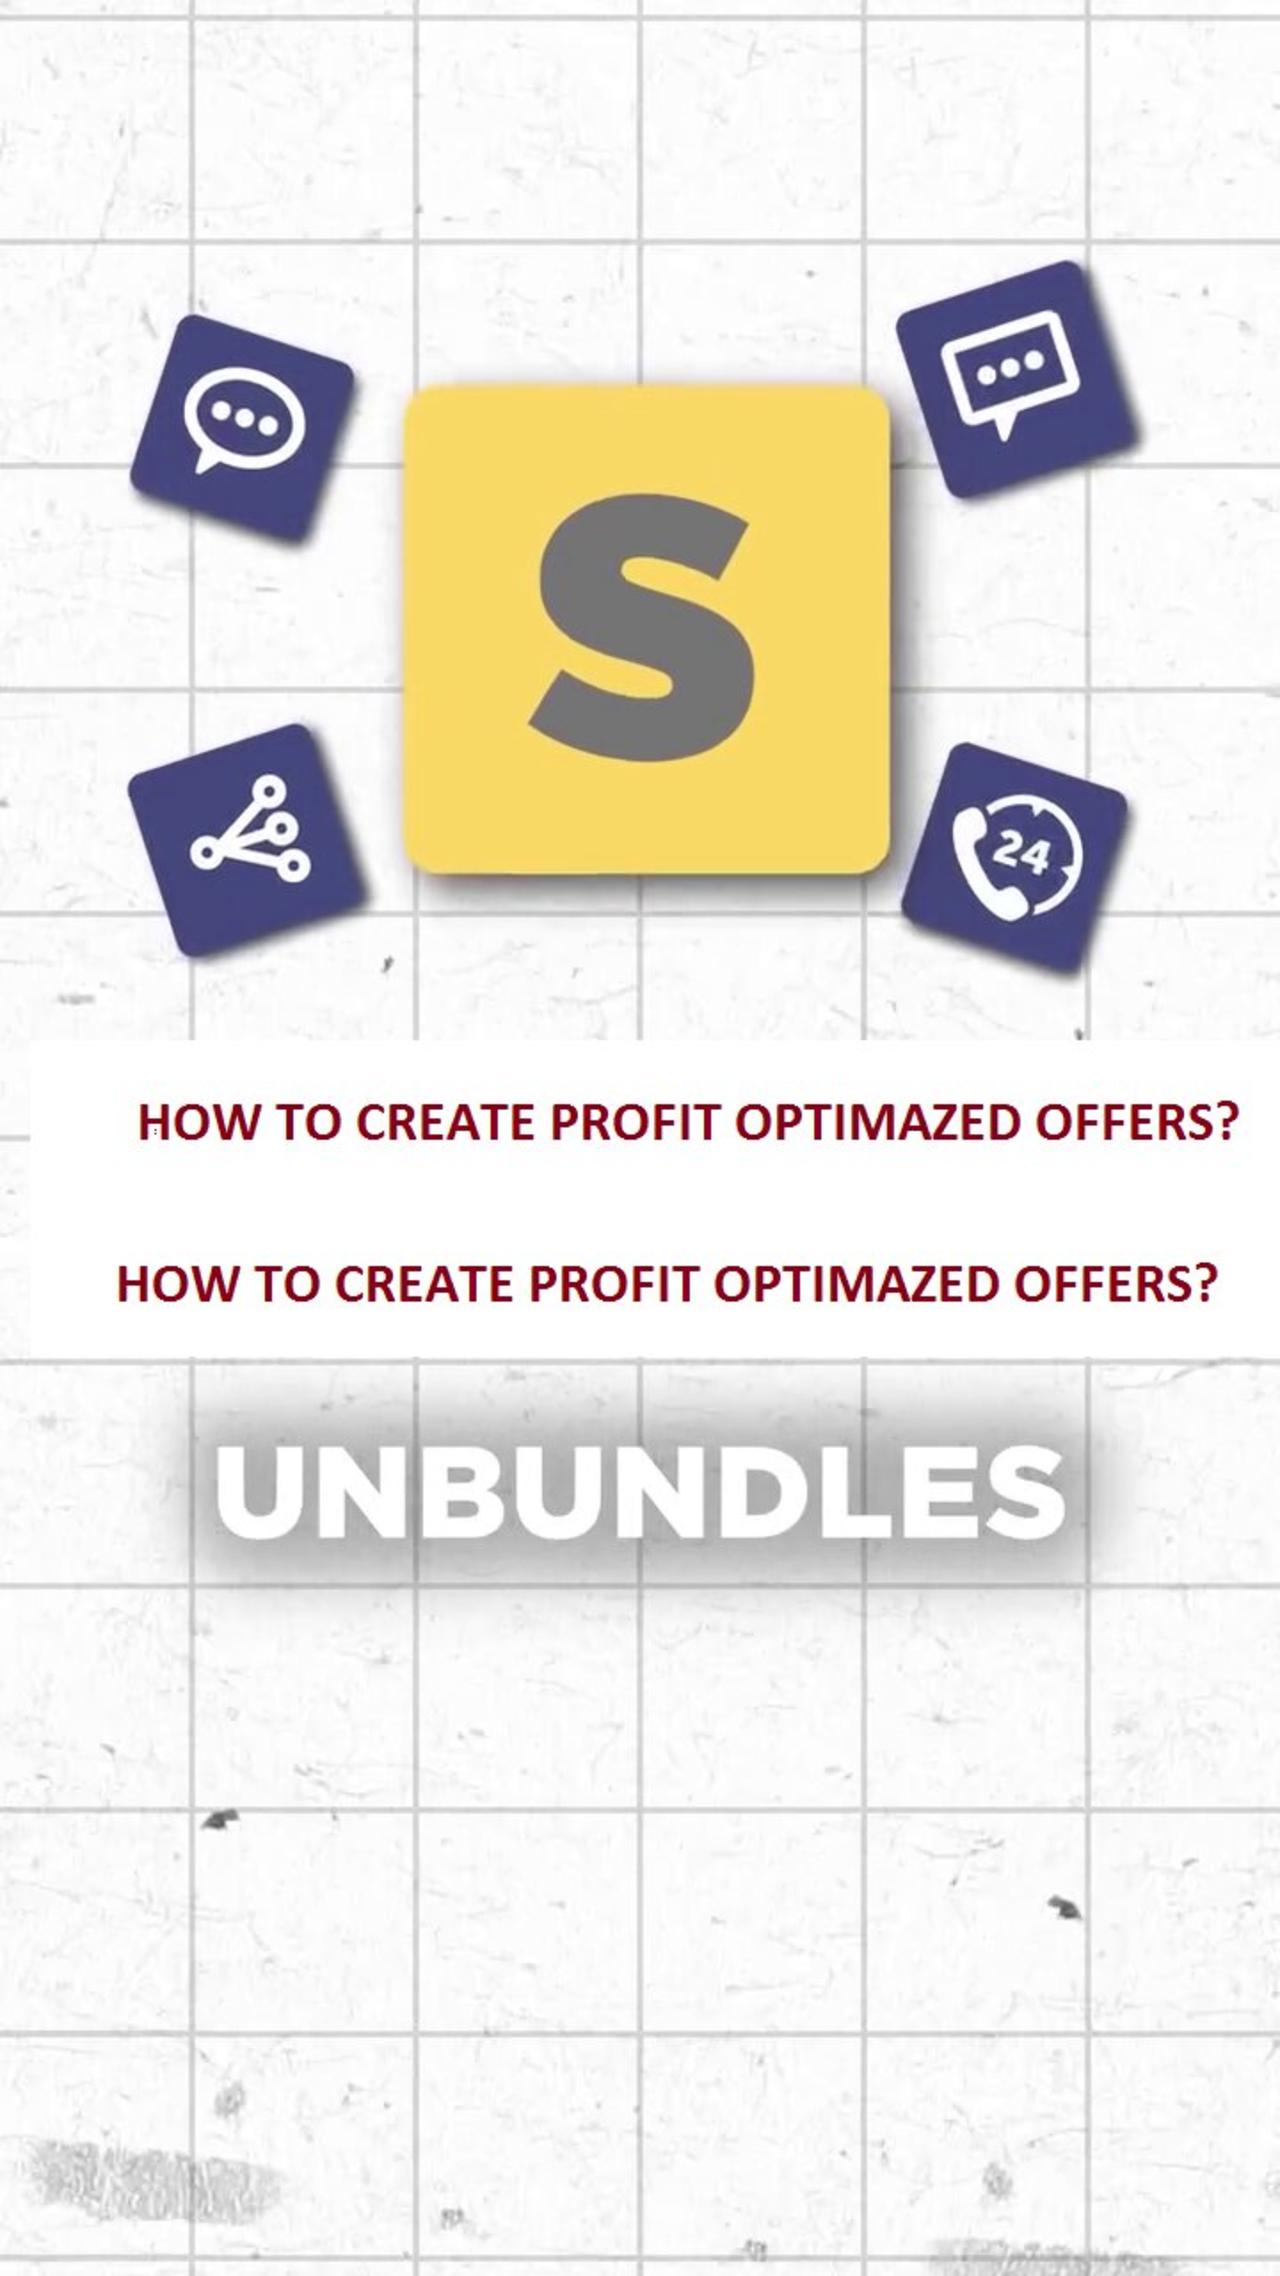 HOW TO CREATE PROFIT OPTIMAZED OFFERS?